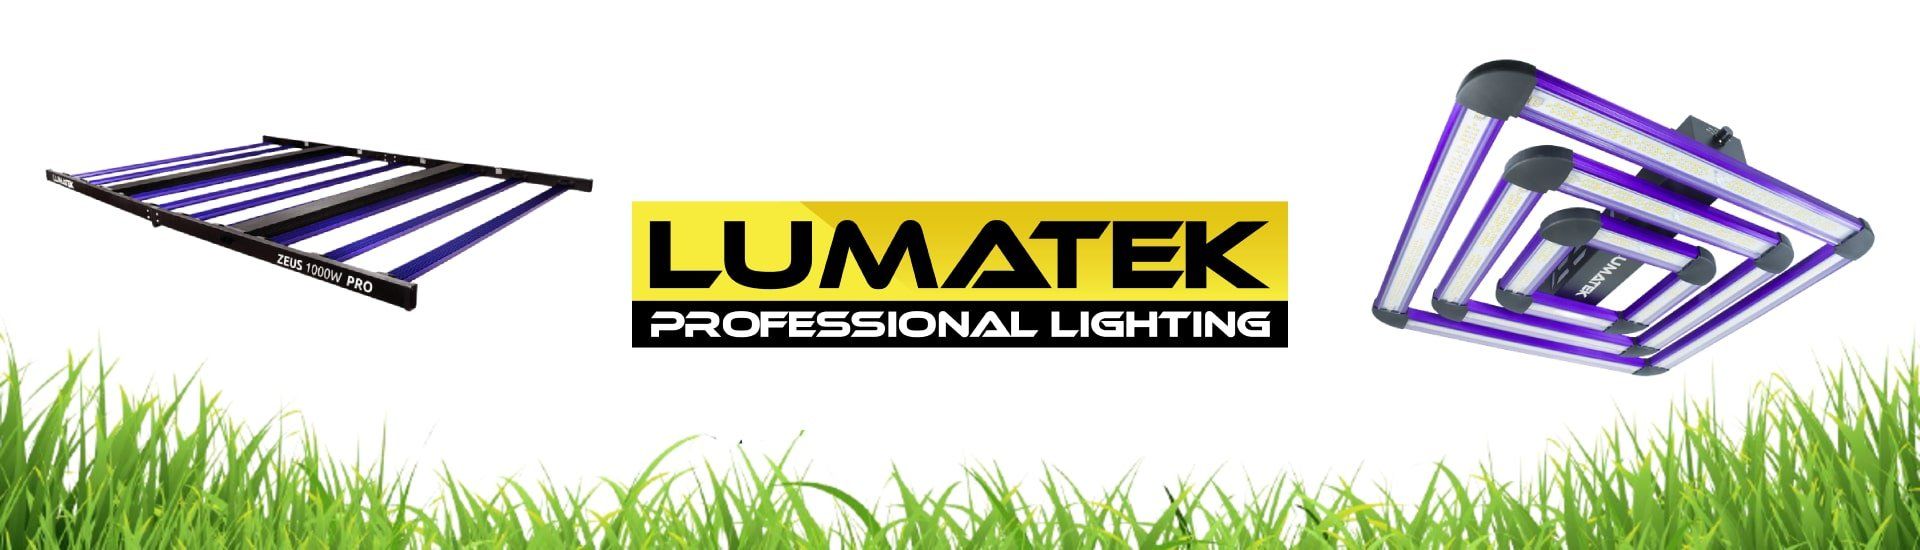 This wide range of lighting products is unbeaten regarding performance and reliability. Lumatek is a premium brand offering the best return on investment solution on the market.